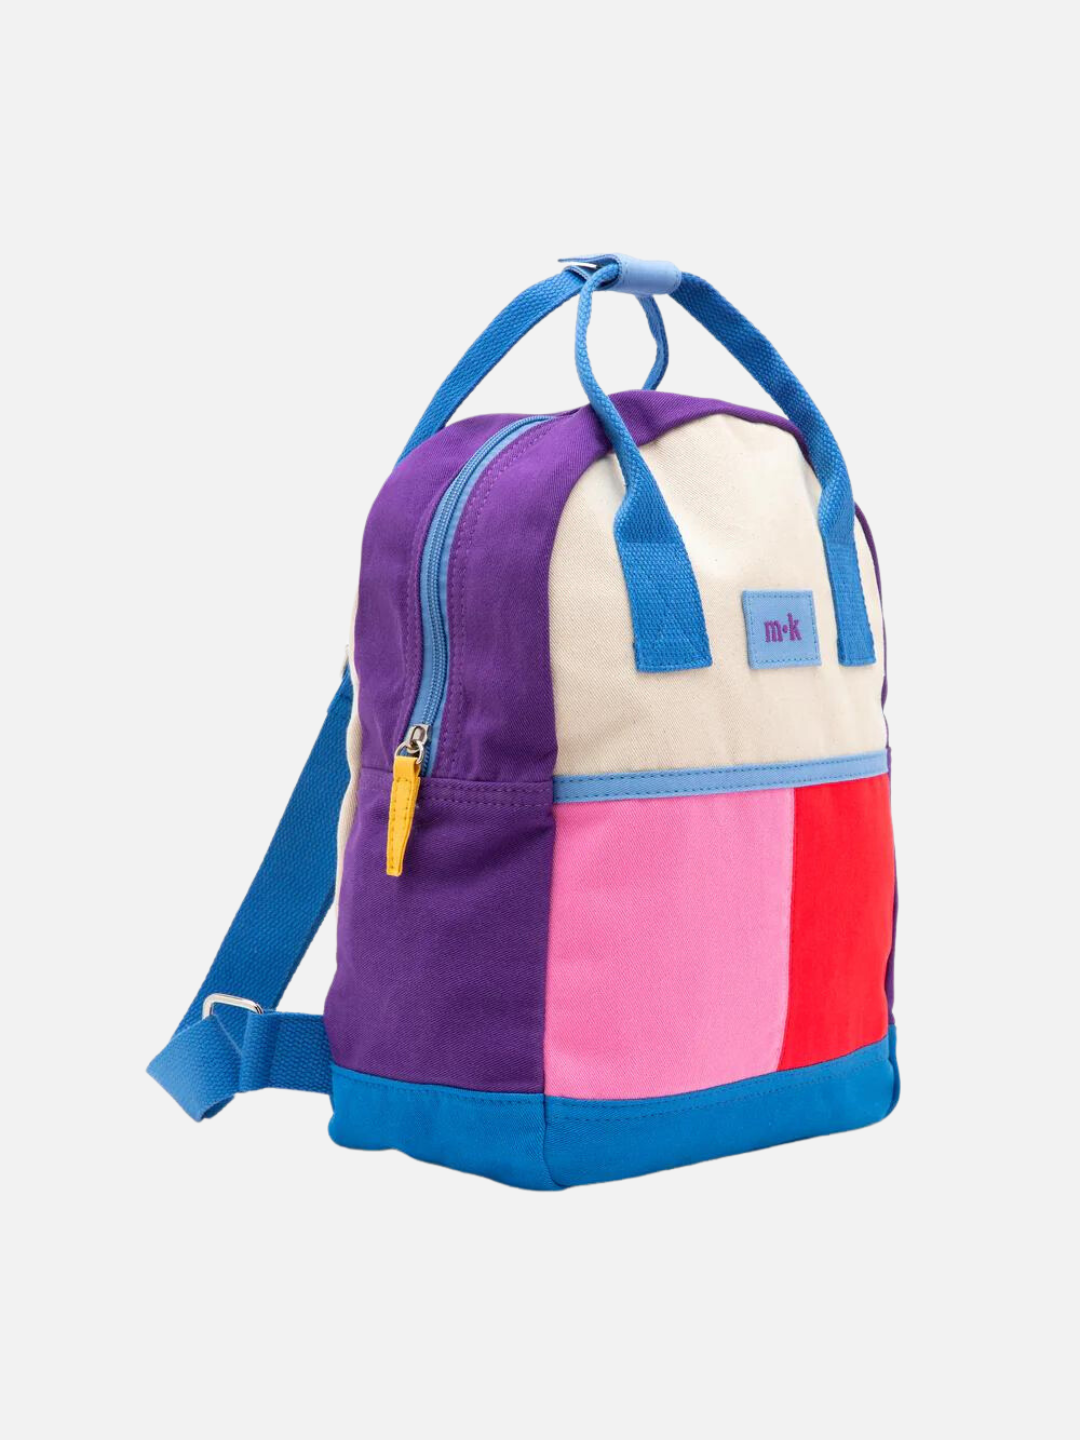 Coral Reef | Side view of a colorblock backpack with bright blue straps, handles and base, purple sides, and one pink, one red patch under a cream top